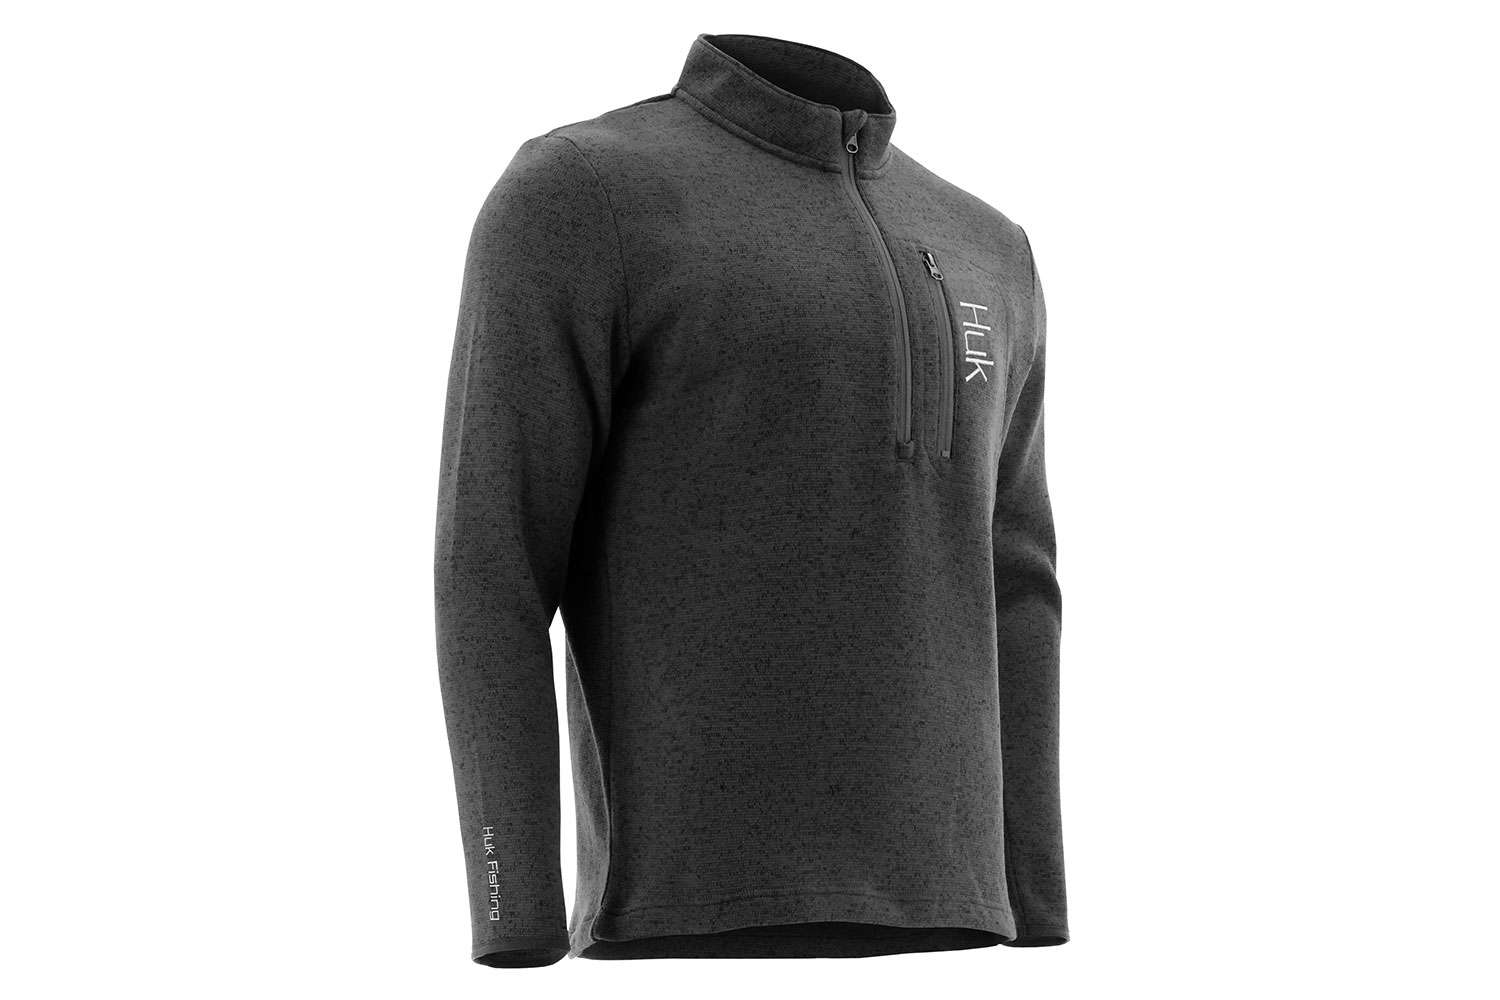 <p><b>Huk Tidewater 1/4 Zip, $54.99</b></p> Engineered to handle a chilly fishing day with ease, Huk fleece is packed with performance. From sunup to sundown on the water or heading to town to meet the boys after work, Huk fleece will keep you warm and comfortable all fall. Water resistant, repels boat spray and light rain. Stain and wind resistant. <br> <a href=